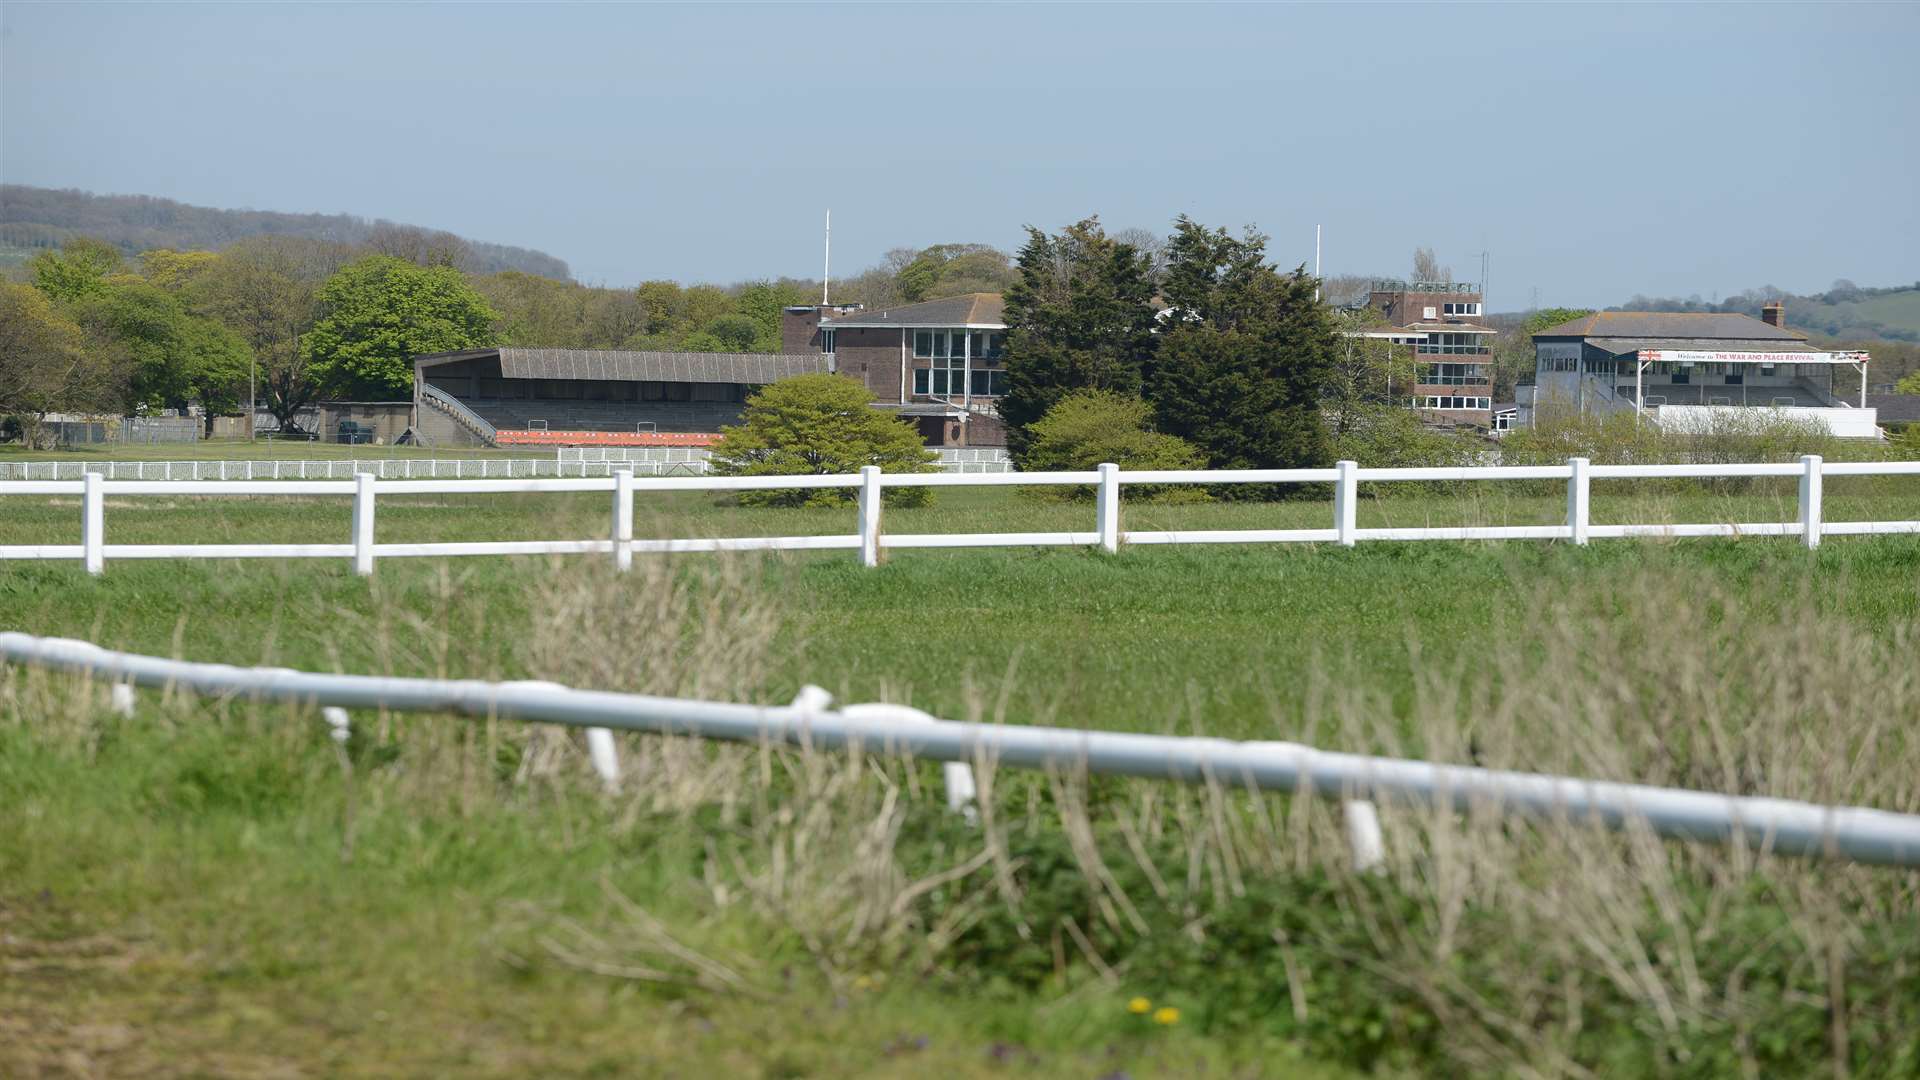 Folkestone Racecourse forms part of the 1,279 acre site